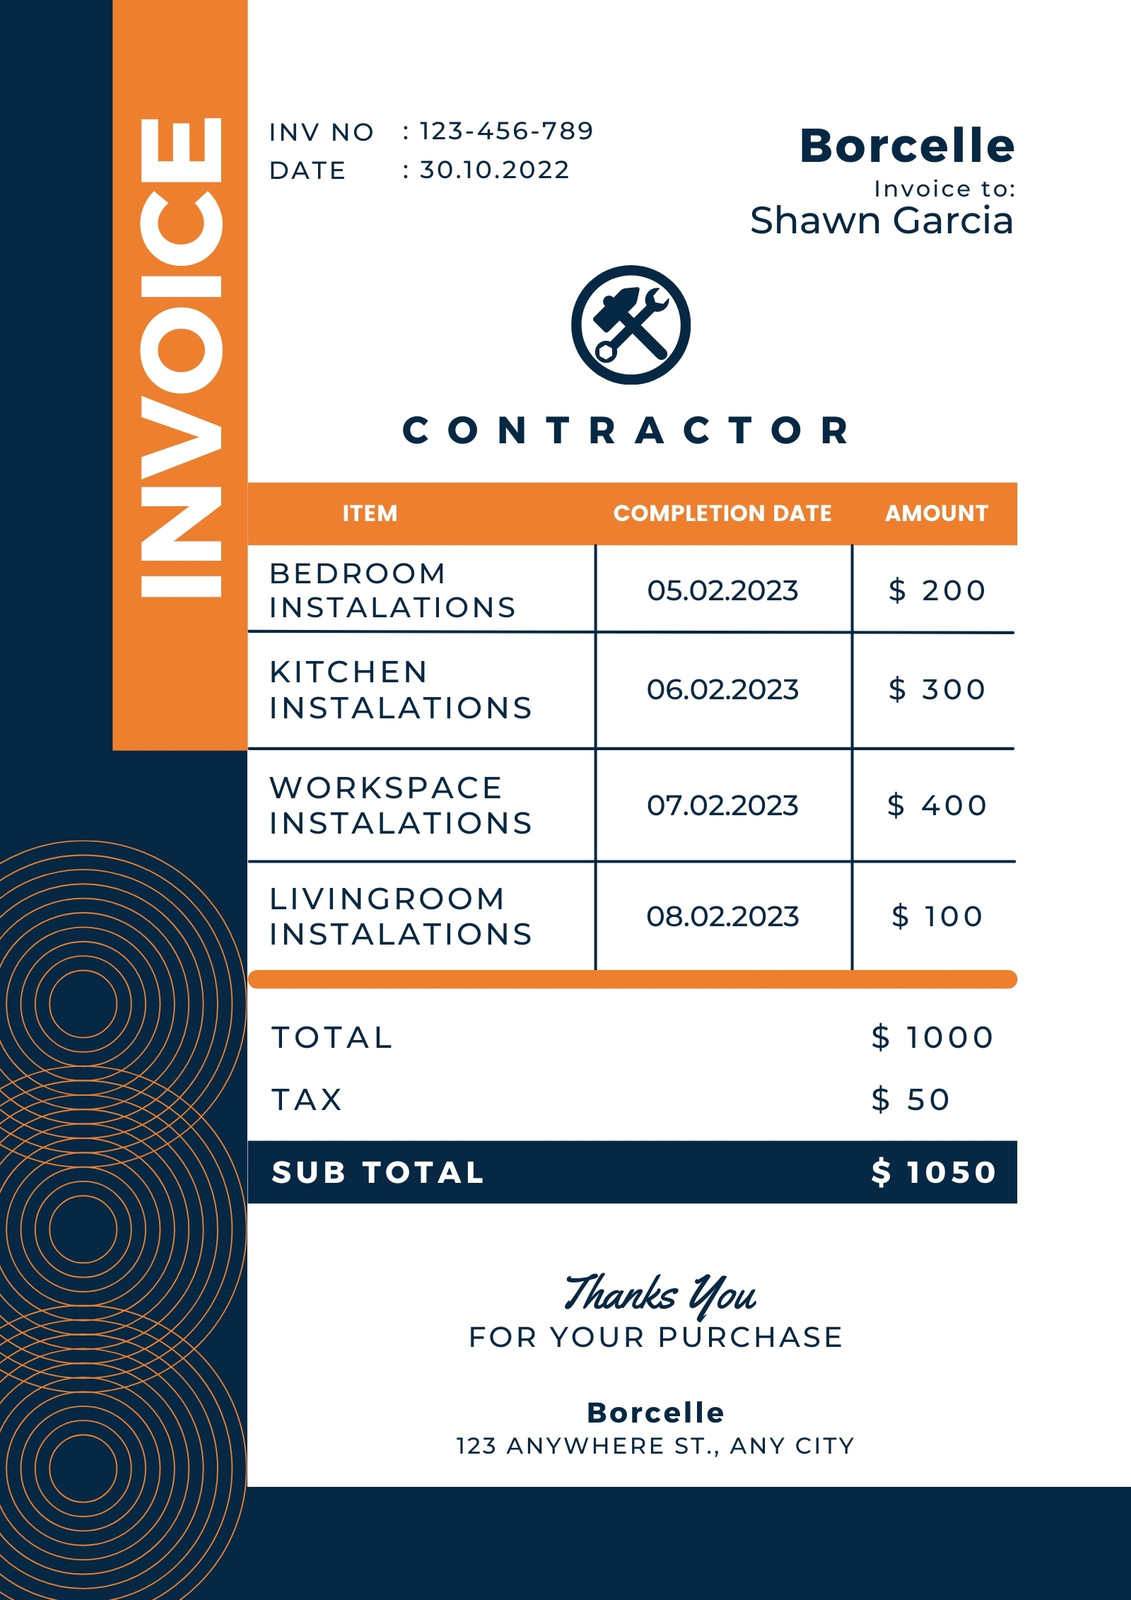 Page 8 - Free, printable, professional invoice templates to customize |  Canva